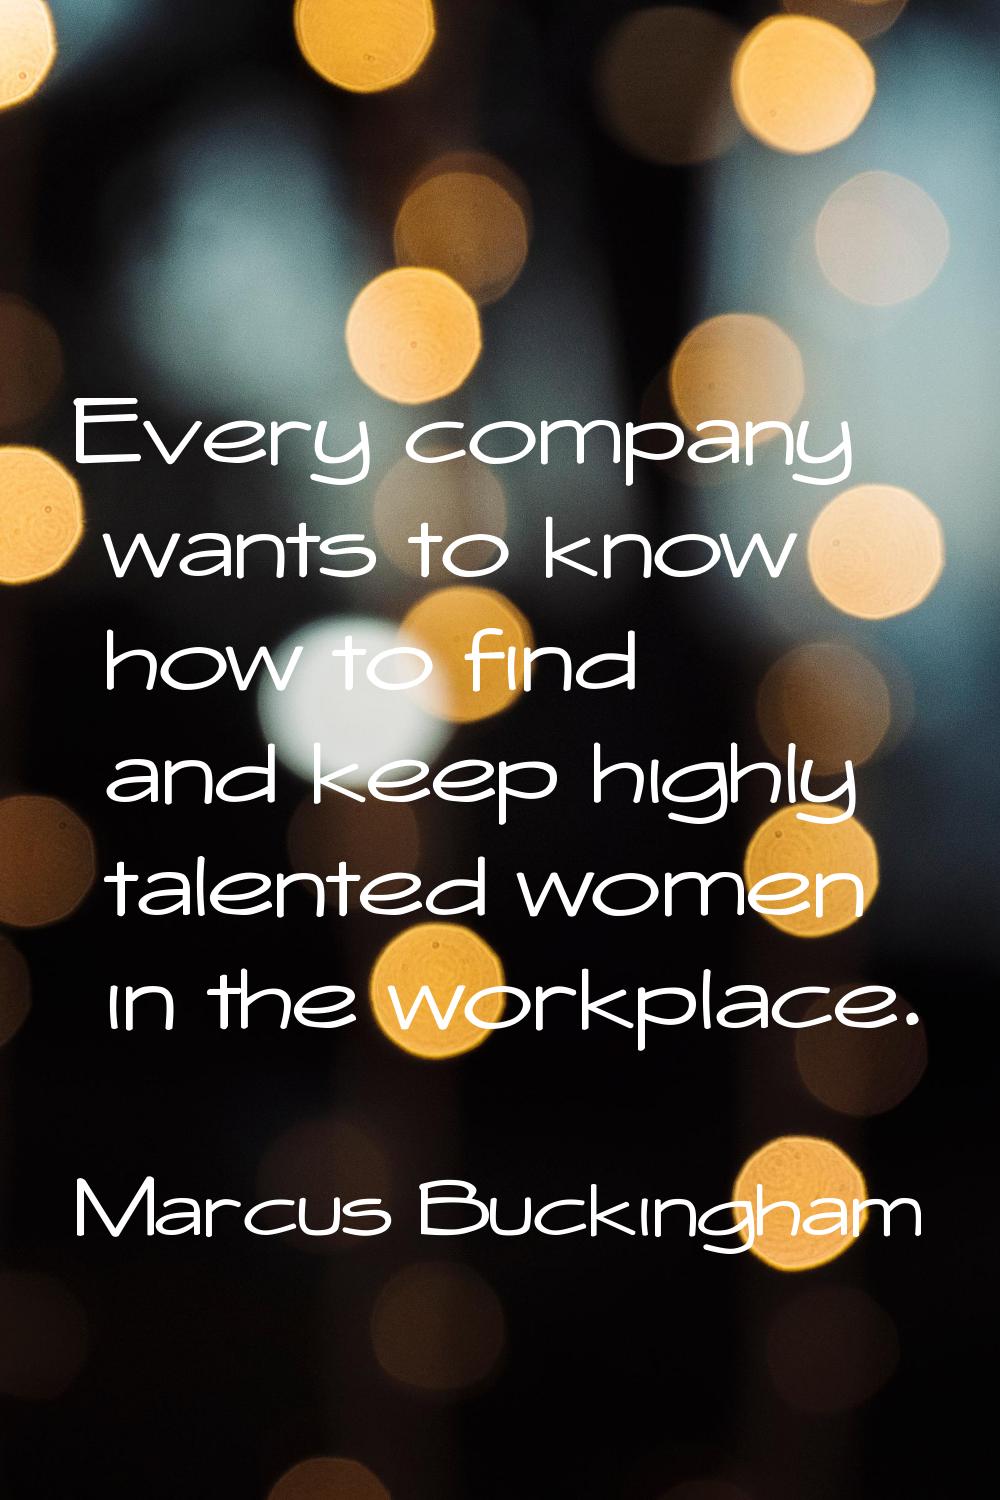 Every company wants to know how to find and keep highly talented women in the workplace.